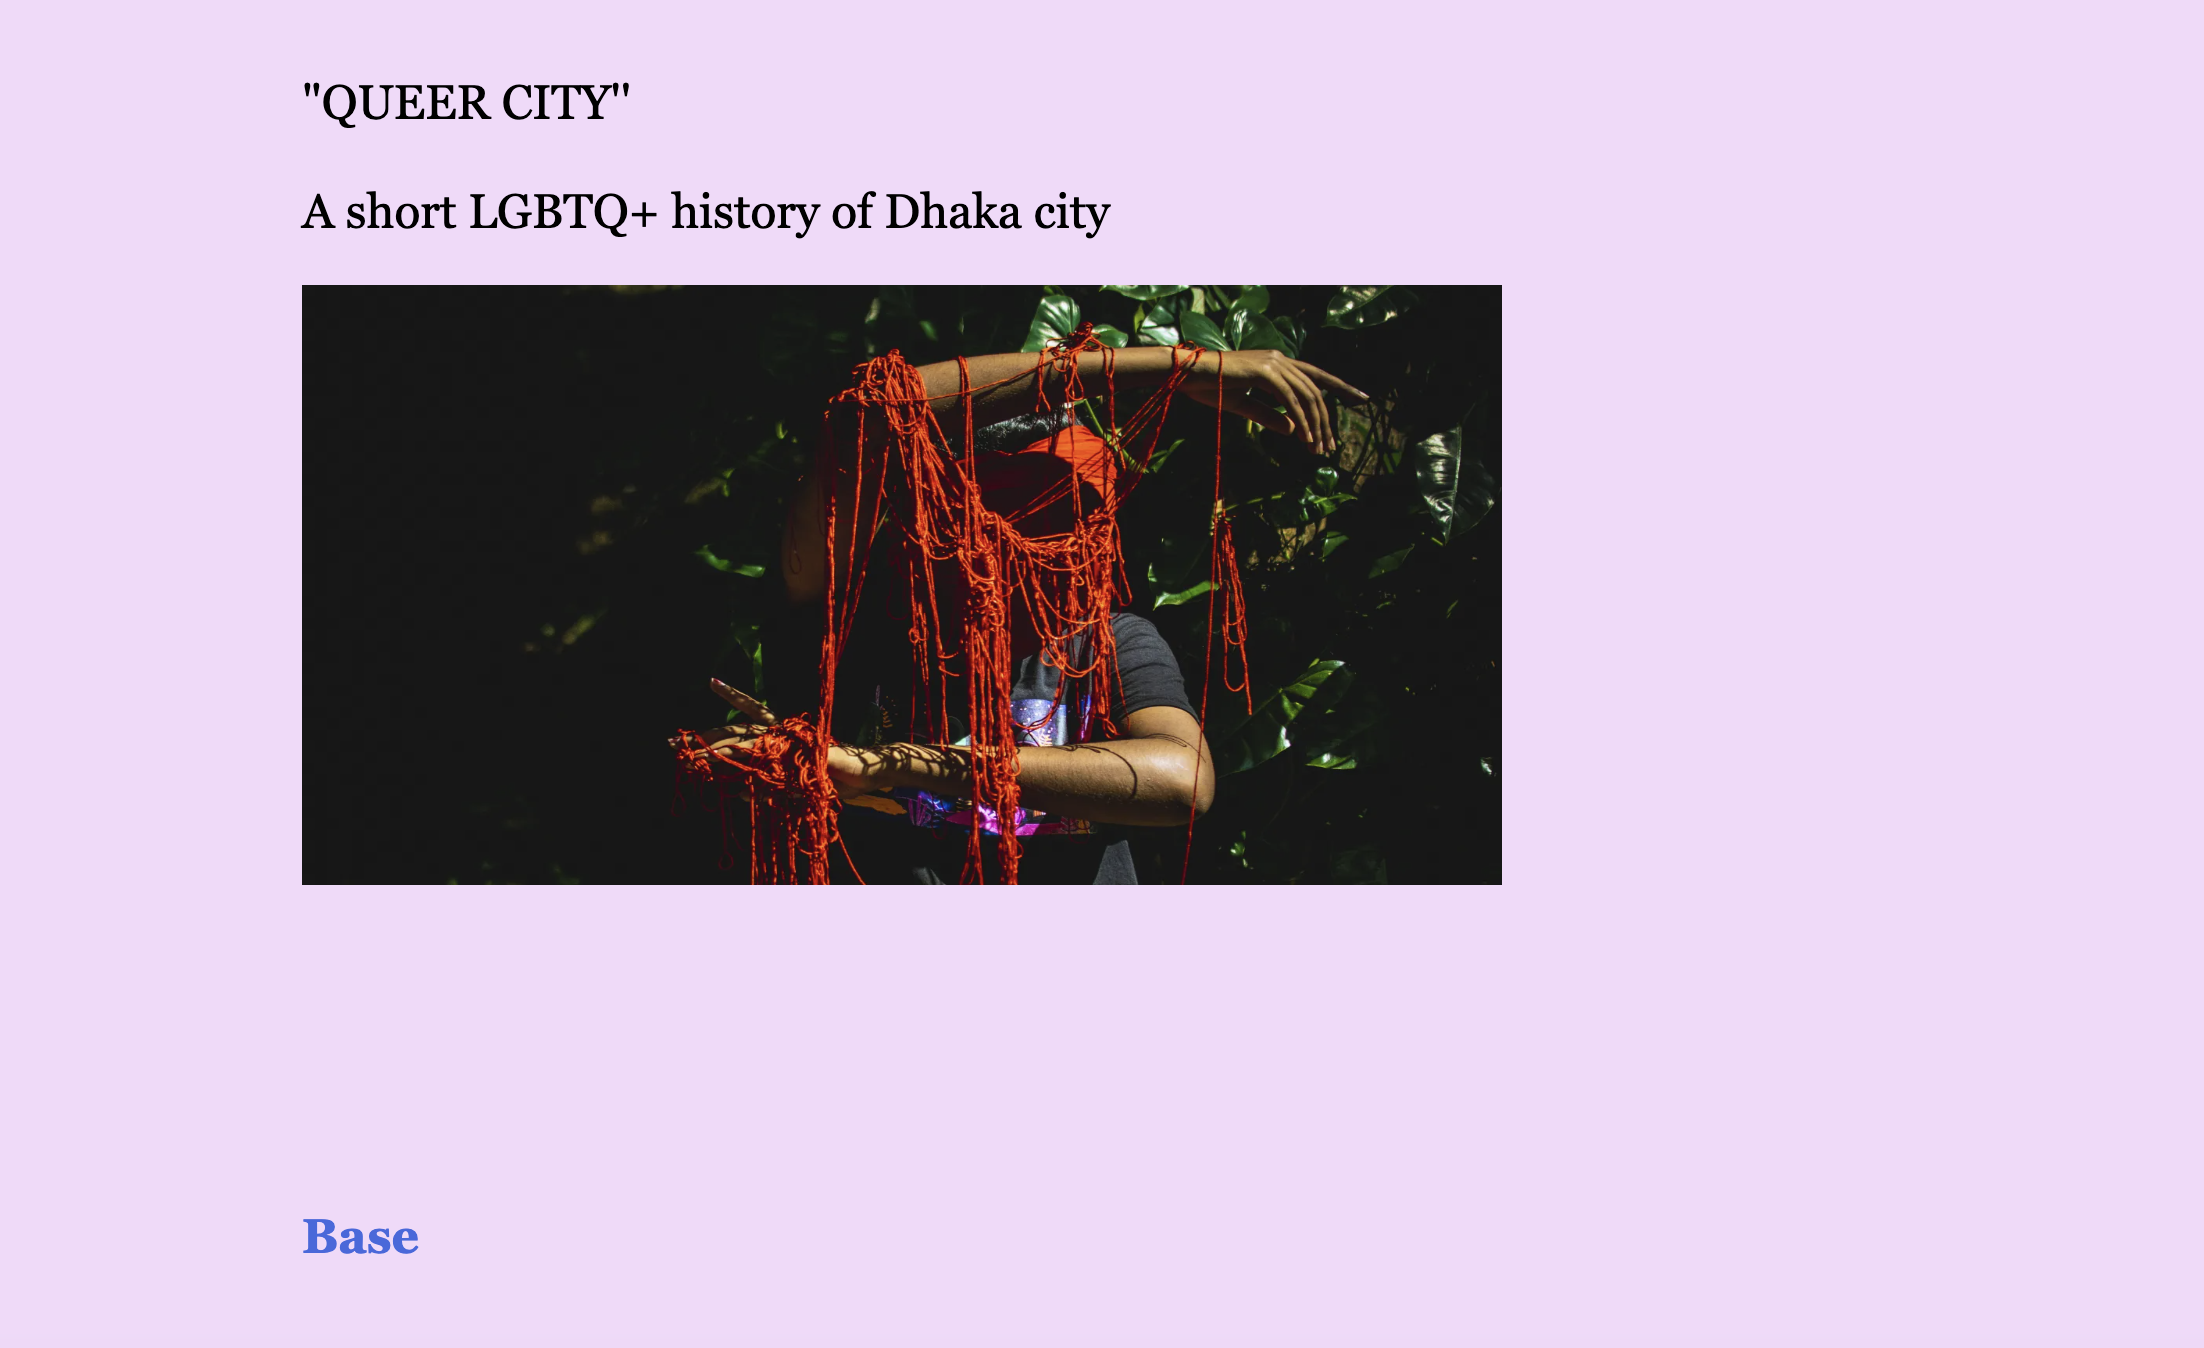 A man intertwined in twine with title: QUEER CITY - A short LGBTQ+ history of Dhaka city.